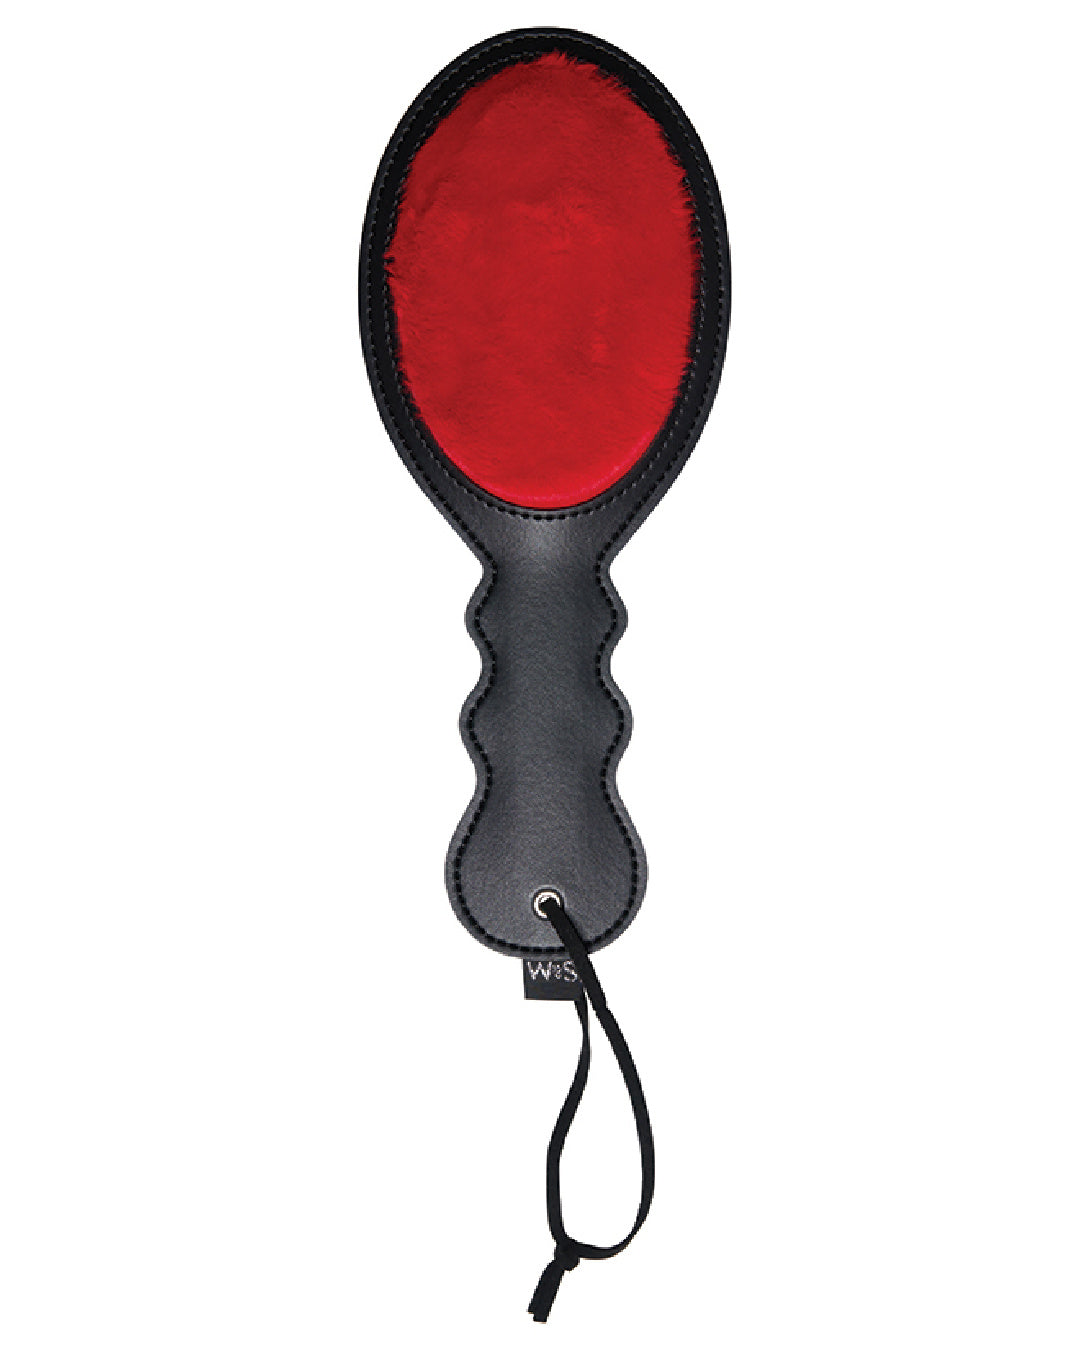 Sex & Mischief Amor Red Paddle front view 